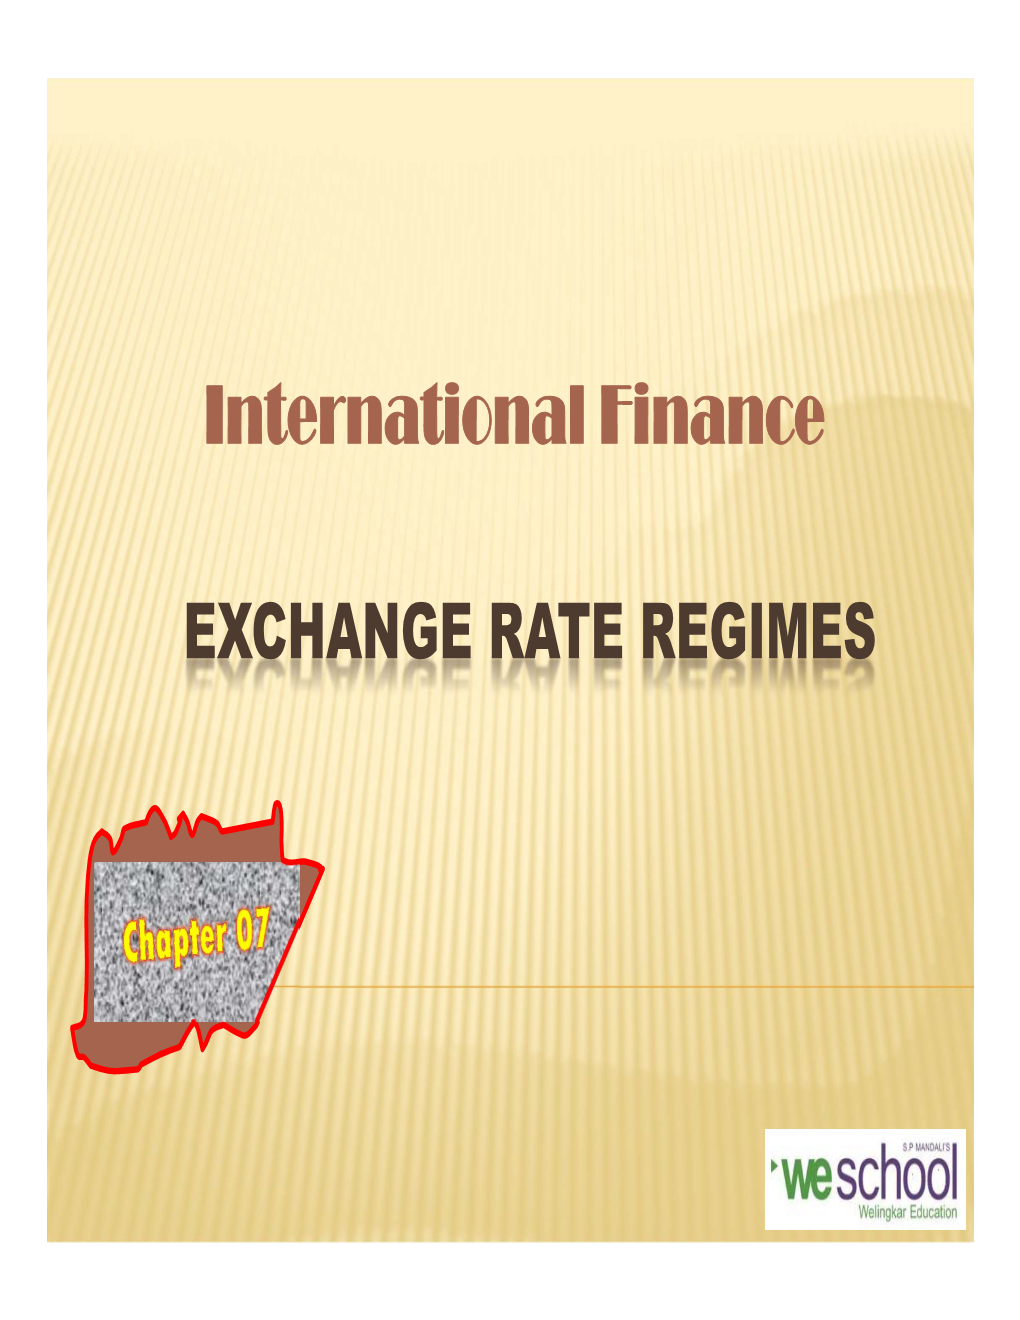 EXCHANGE RATE REGIMES Learning Objectives